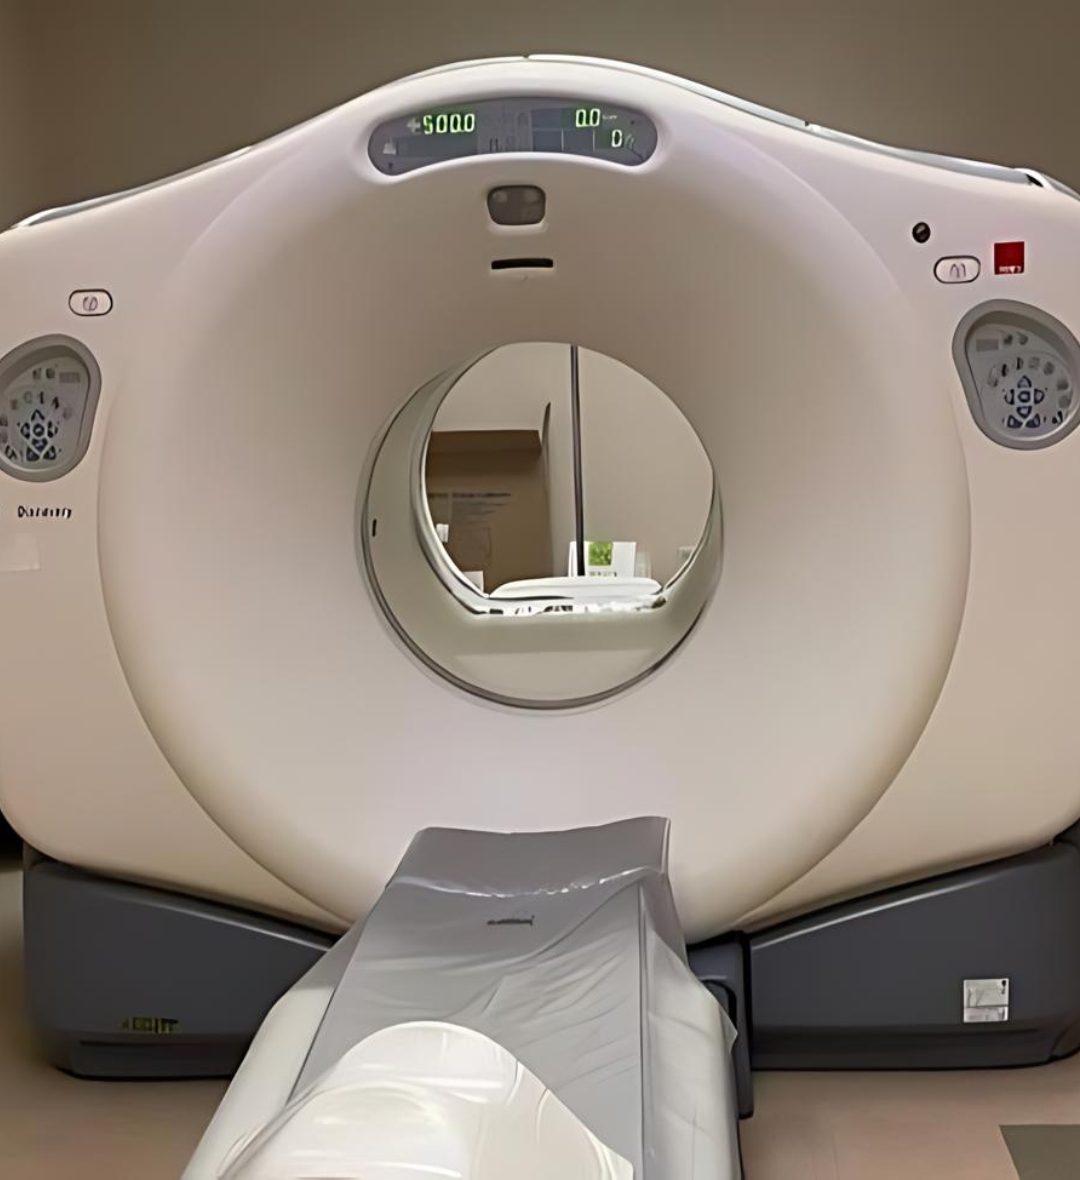  2009 GE Discovery STE 16 PET/CT Scanner 